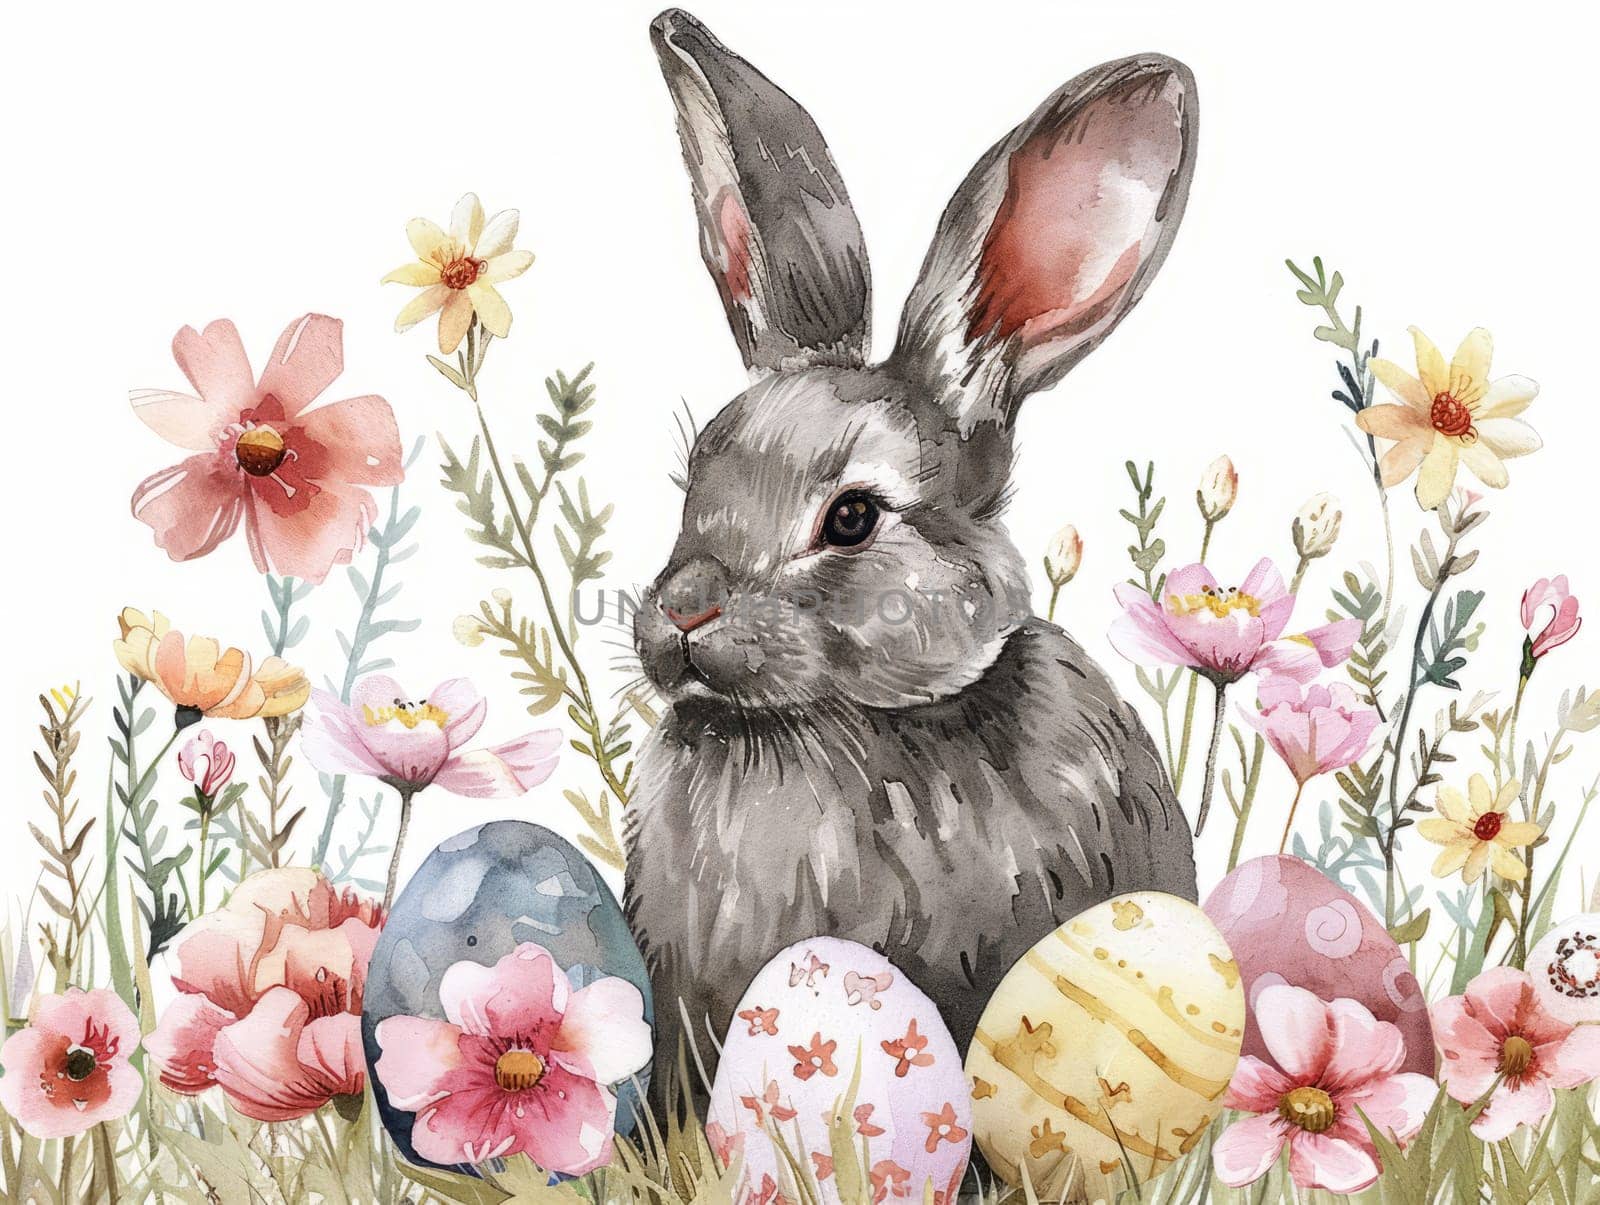 Cute Bunny and Easter Eggs in Floral Meadow Watercolor Illustration. Easter Artistic Decorative Background. Invitation and Greeting Card Template. by iliris